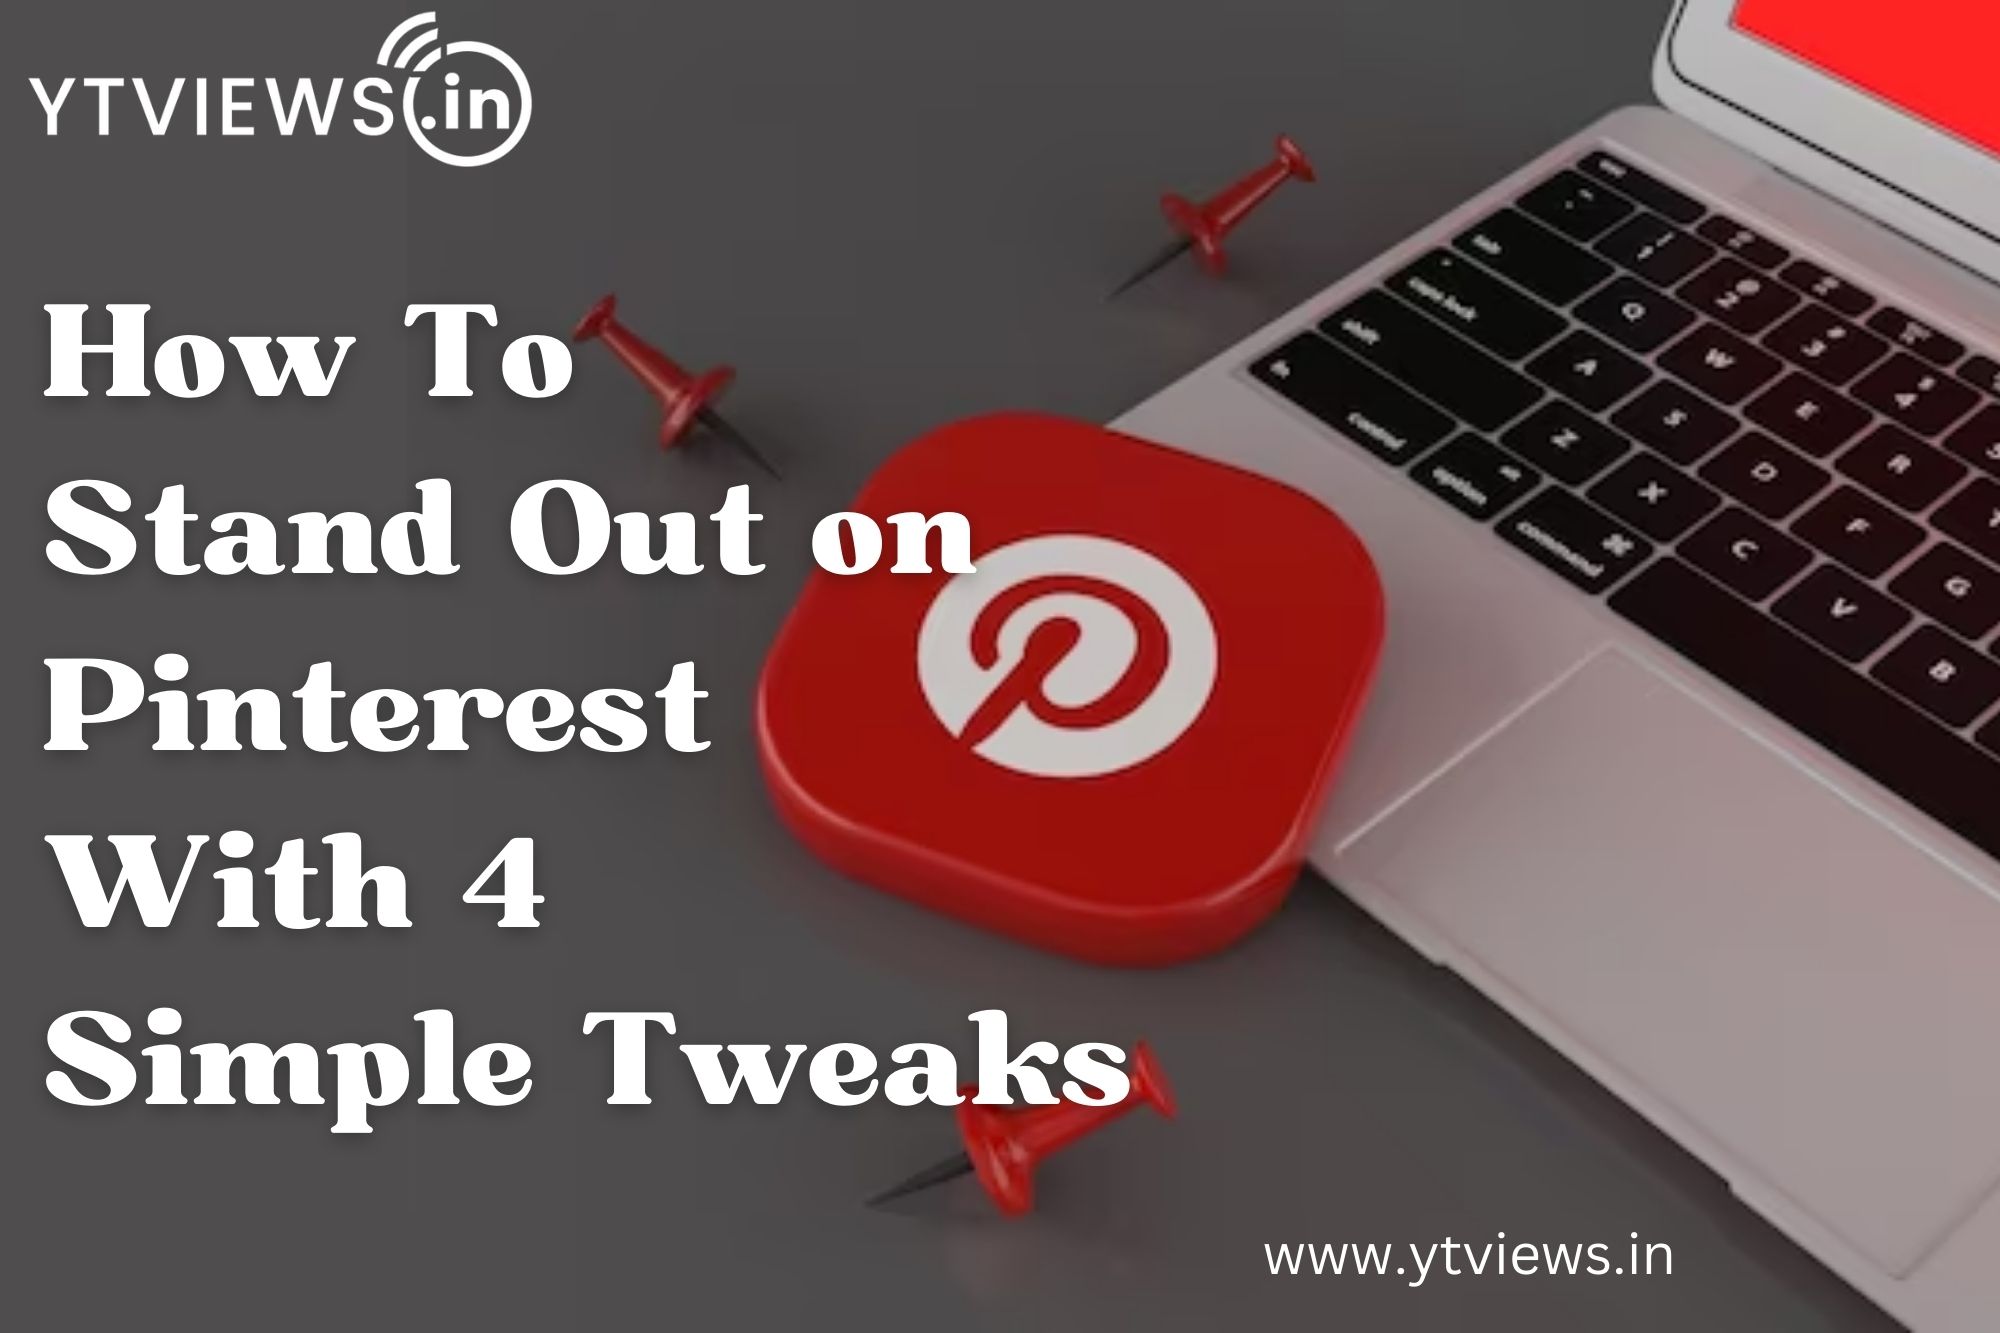 How to stand out on Pinterest with 4 simple tweaks